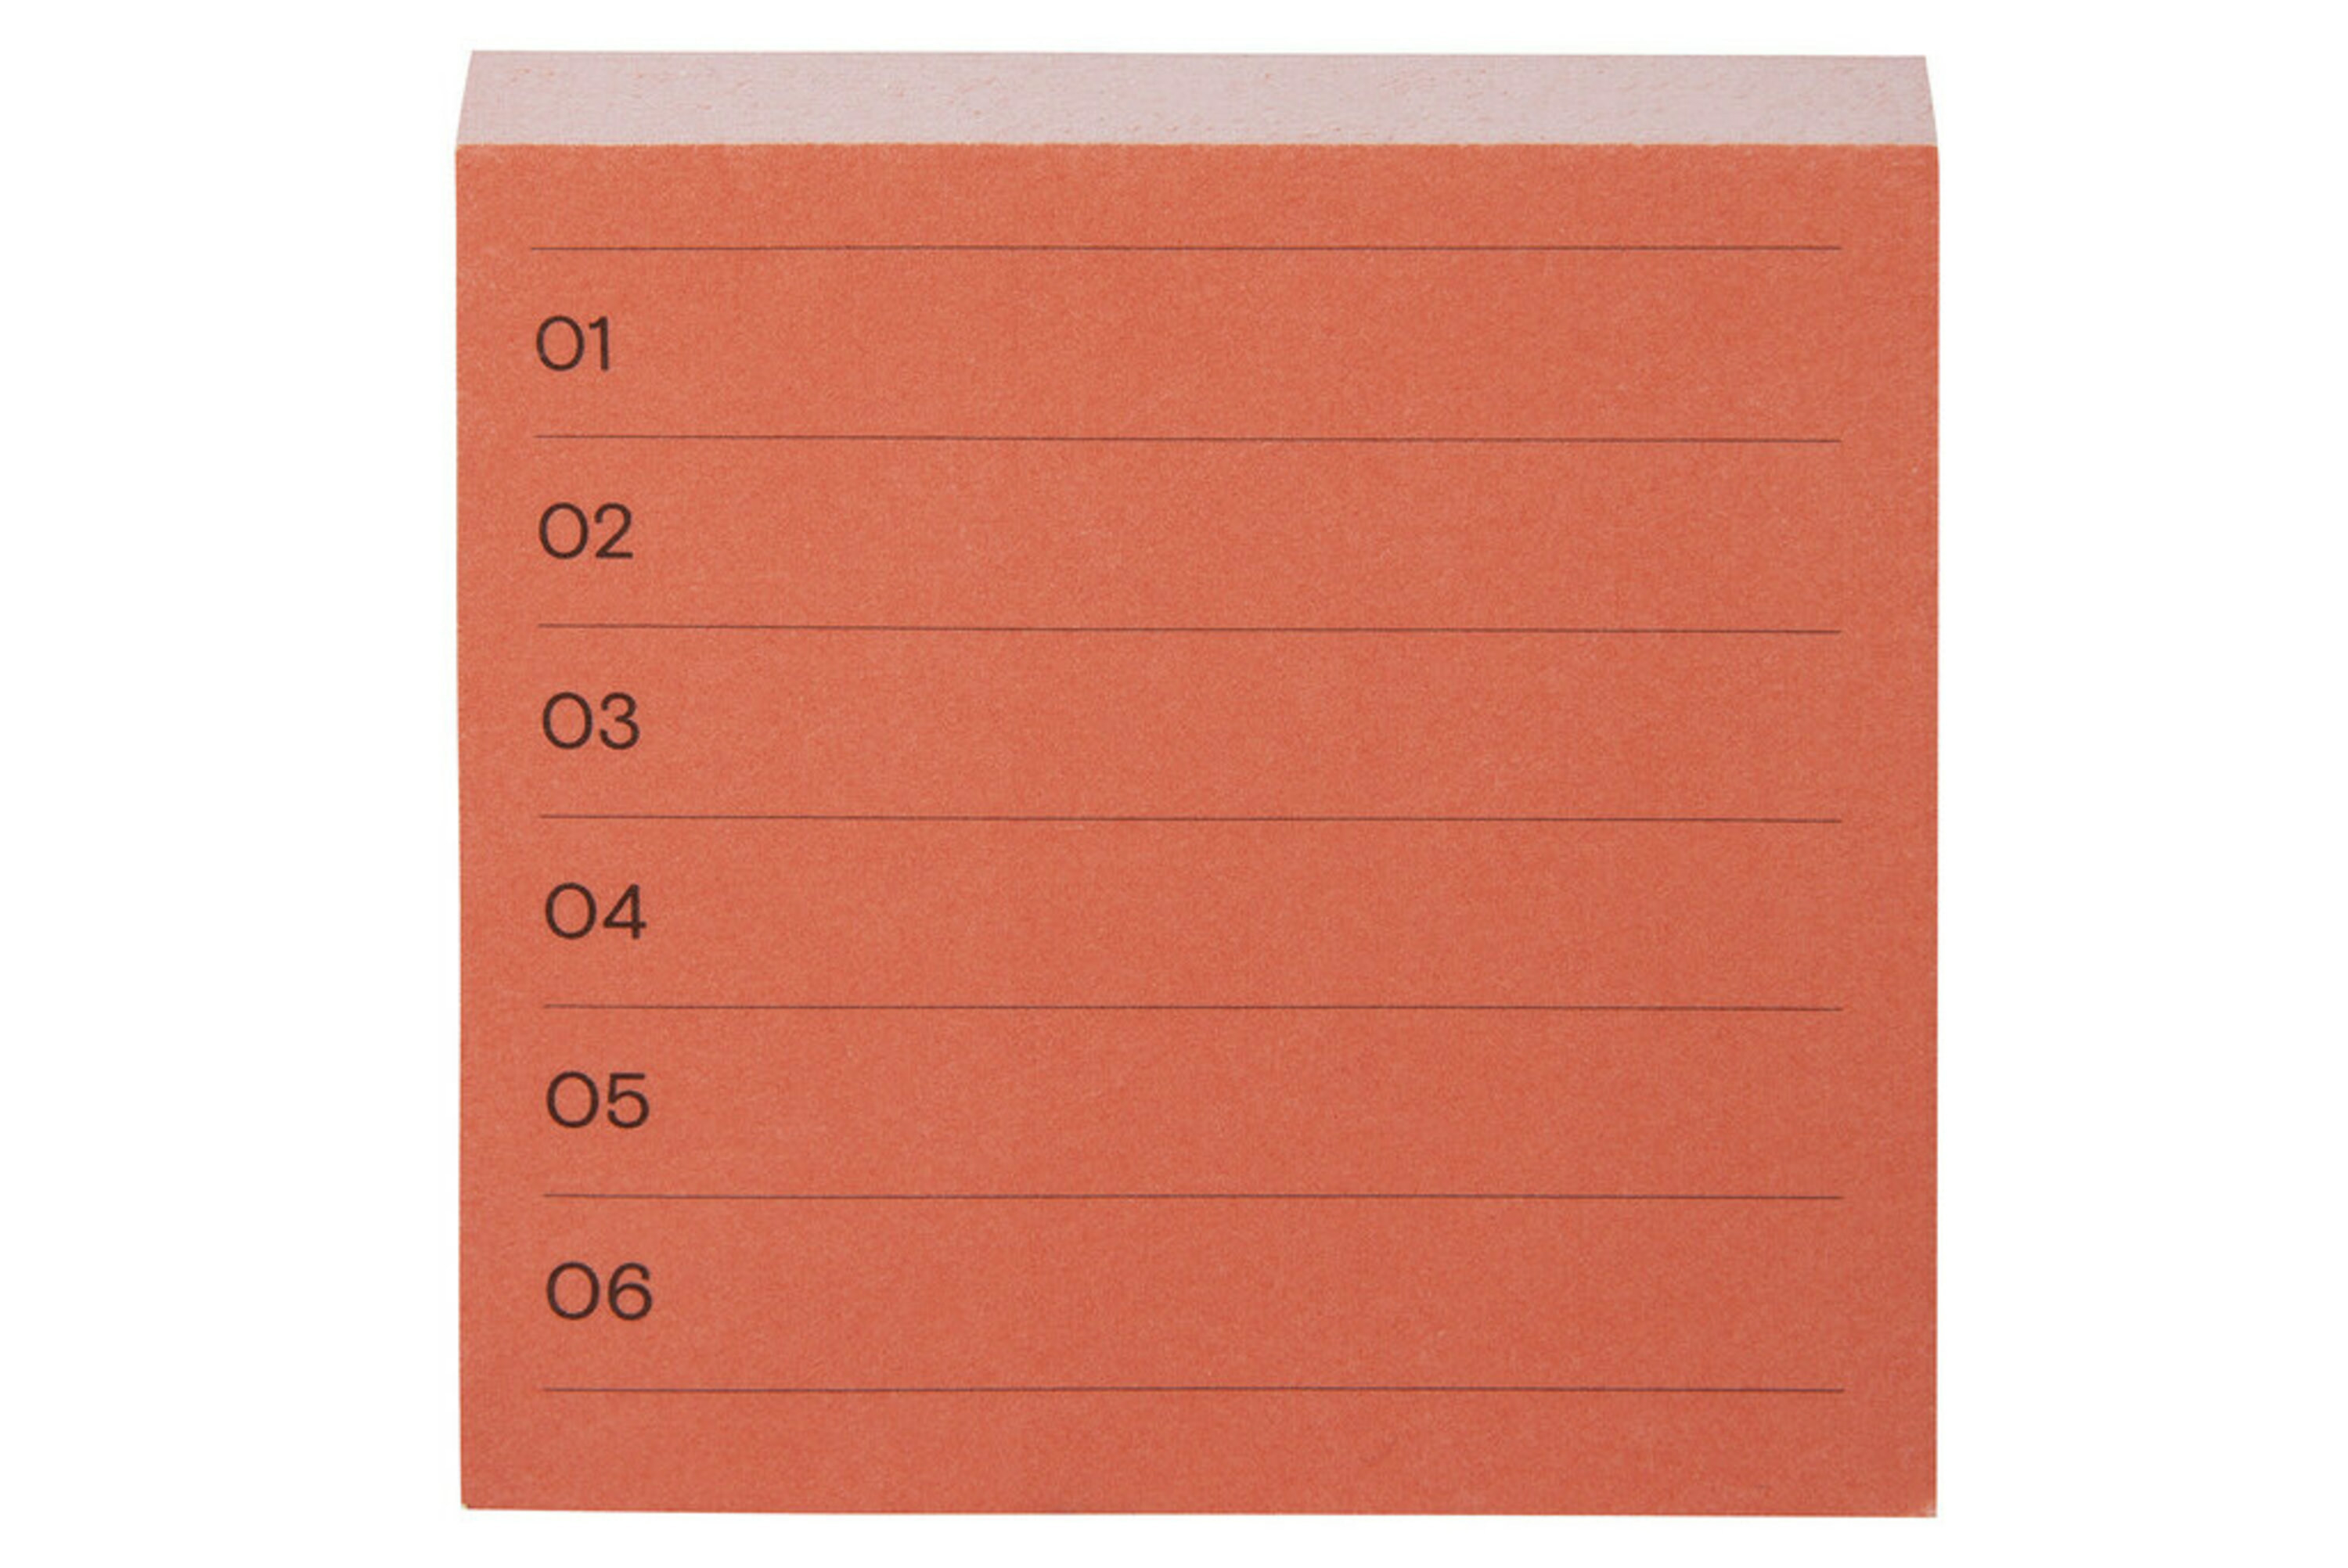 An orange folder with a lined numbered list